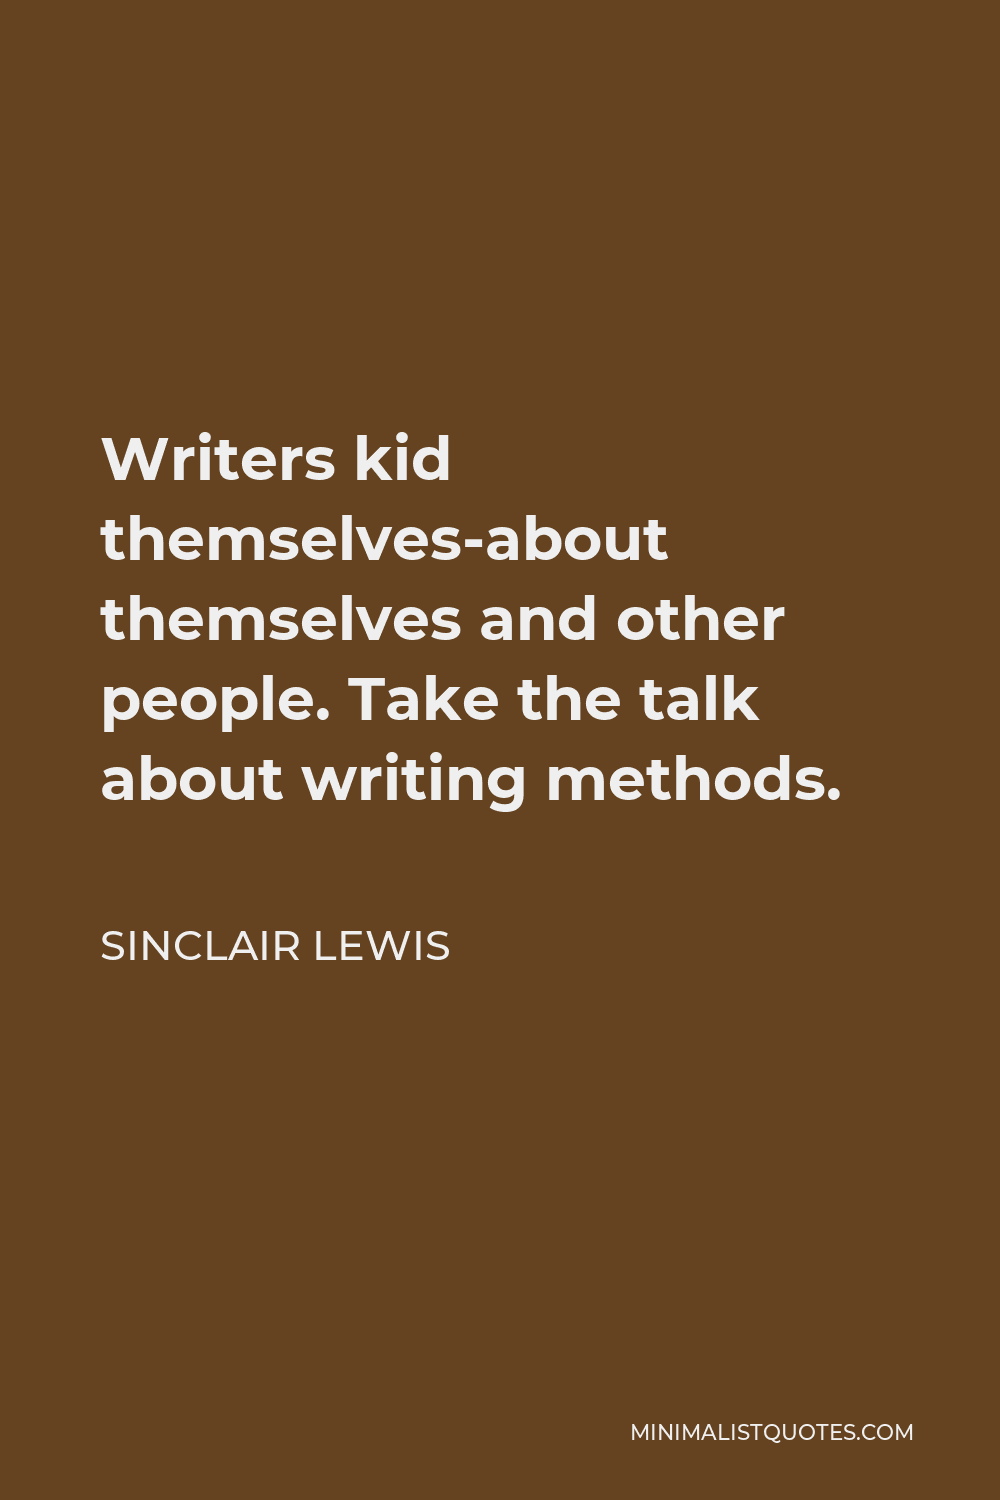 Sinclair Lewis Quote - Writers kid themselves-about themselves and other people. Take the talk about writing methods.